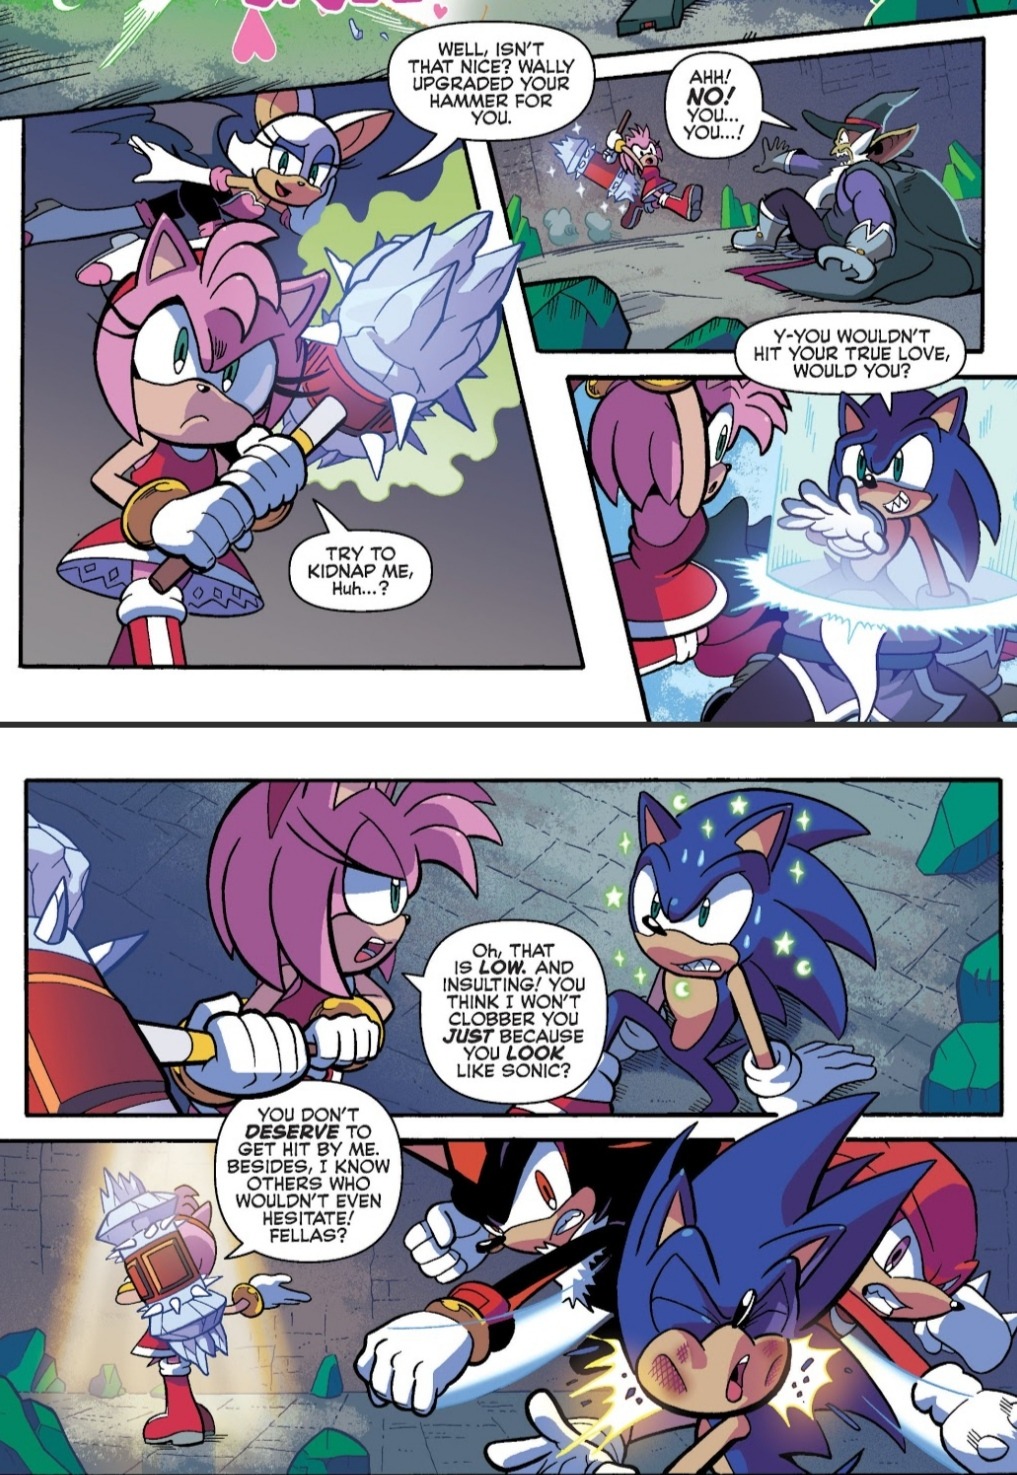 Gotta love IDW's portrayal of Sonic and Amy's relationship :  r/SonicTheHedgehog